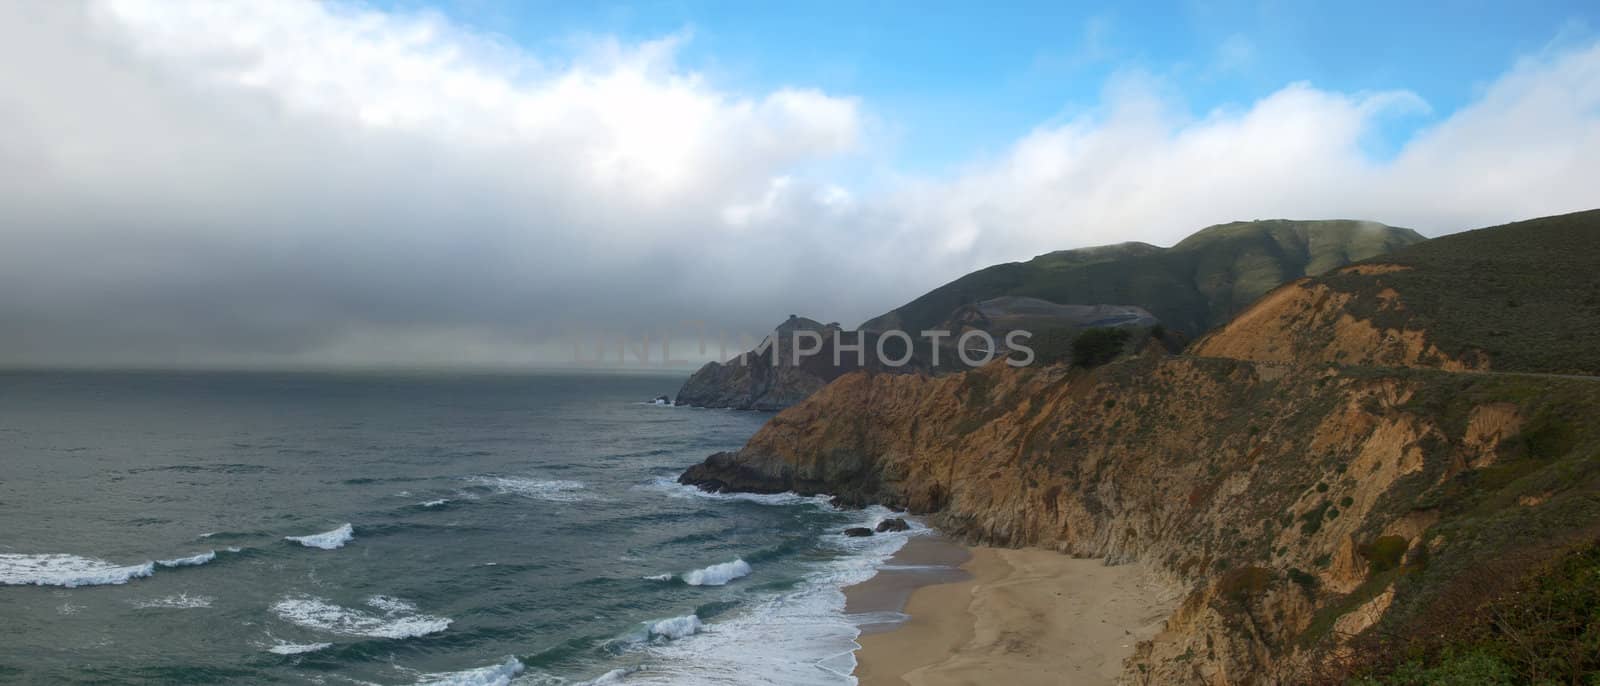 California Coast with Clouds Over Pacific by goldenangel